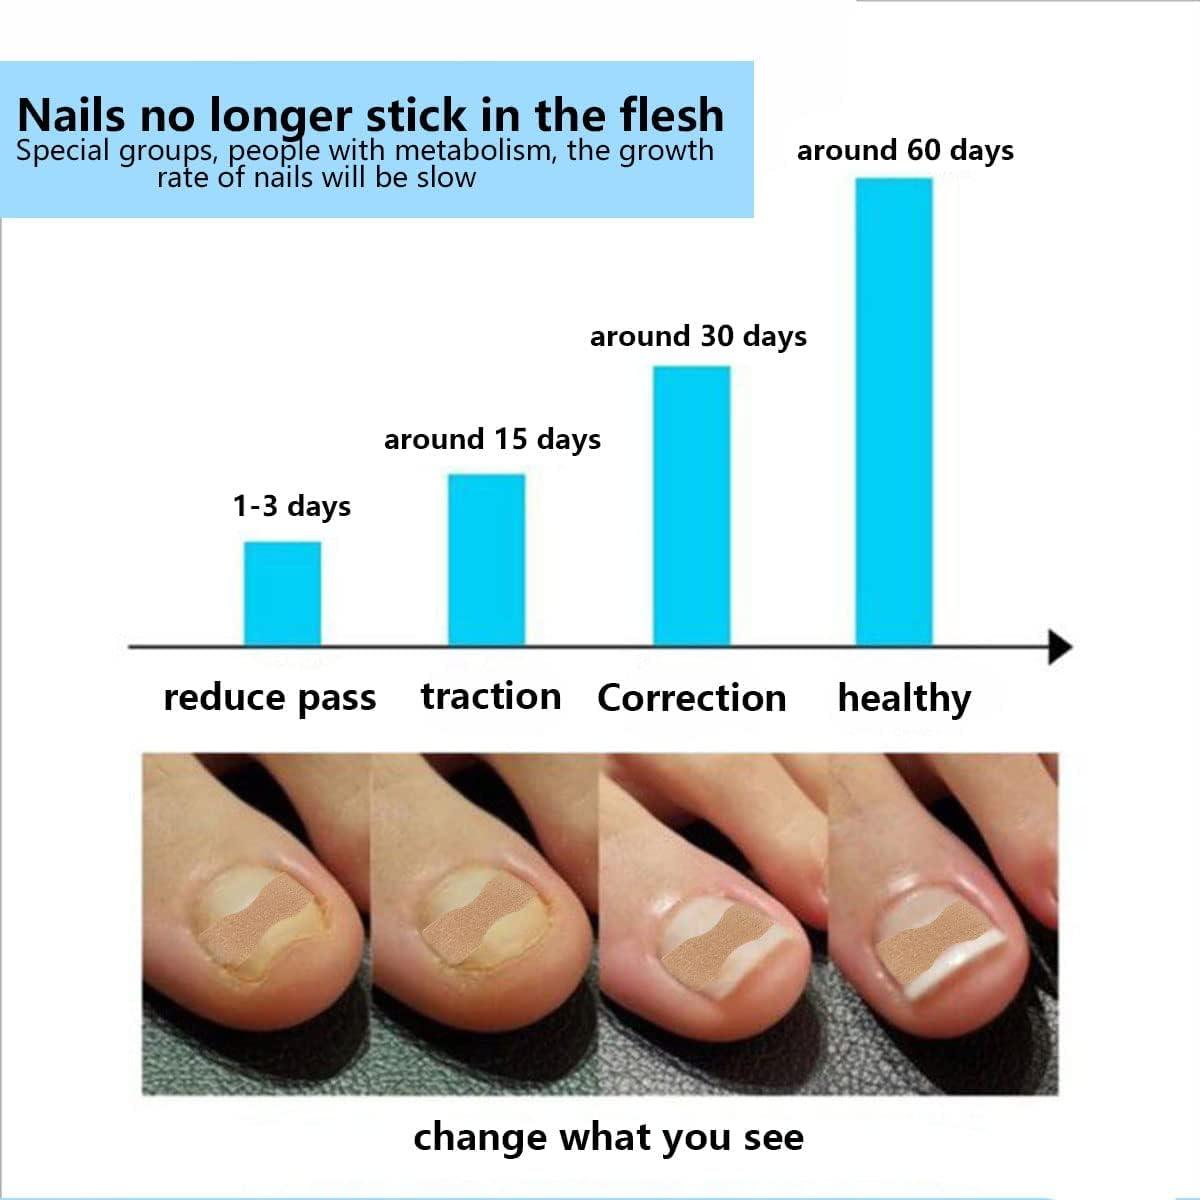 Oral supplementation with specific bioactive collagen peptides improves nail  growth and reduces symptoms of brittle nails - Hexsel - 2017 - Journal of  Cosmetic Dermatology - Wiley Online Library